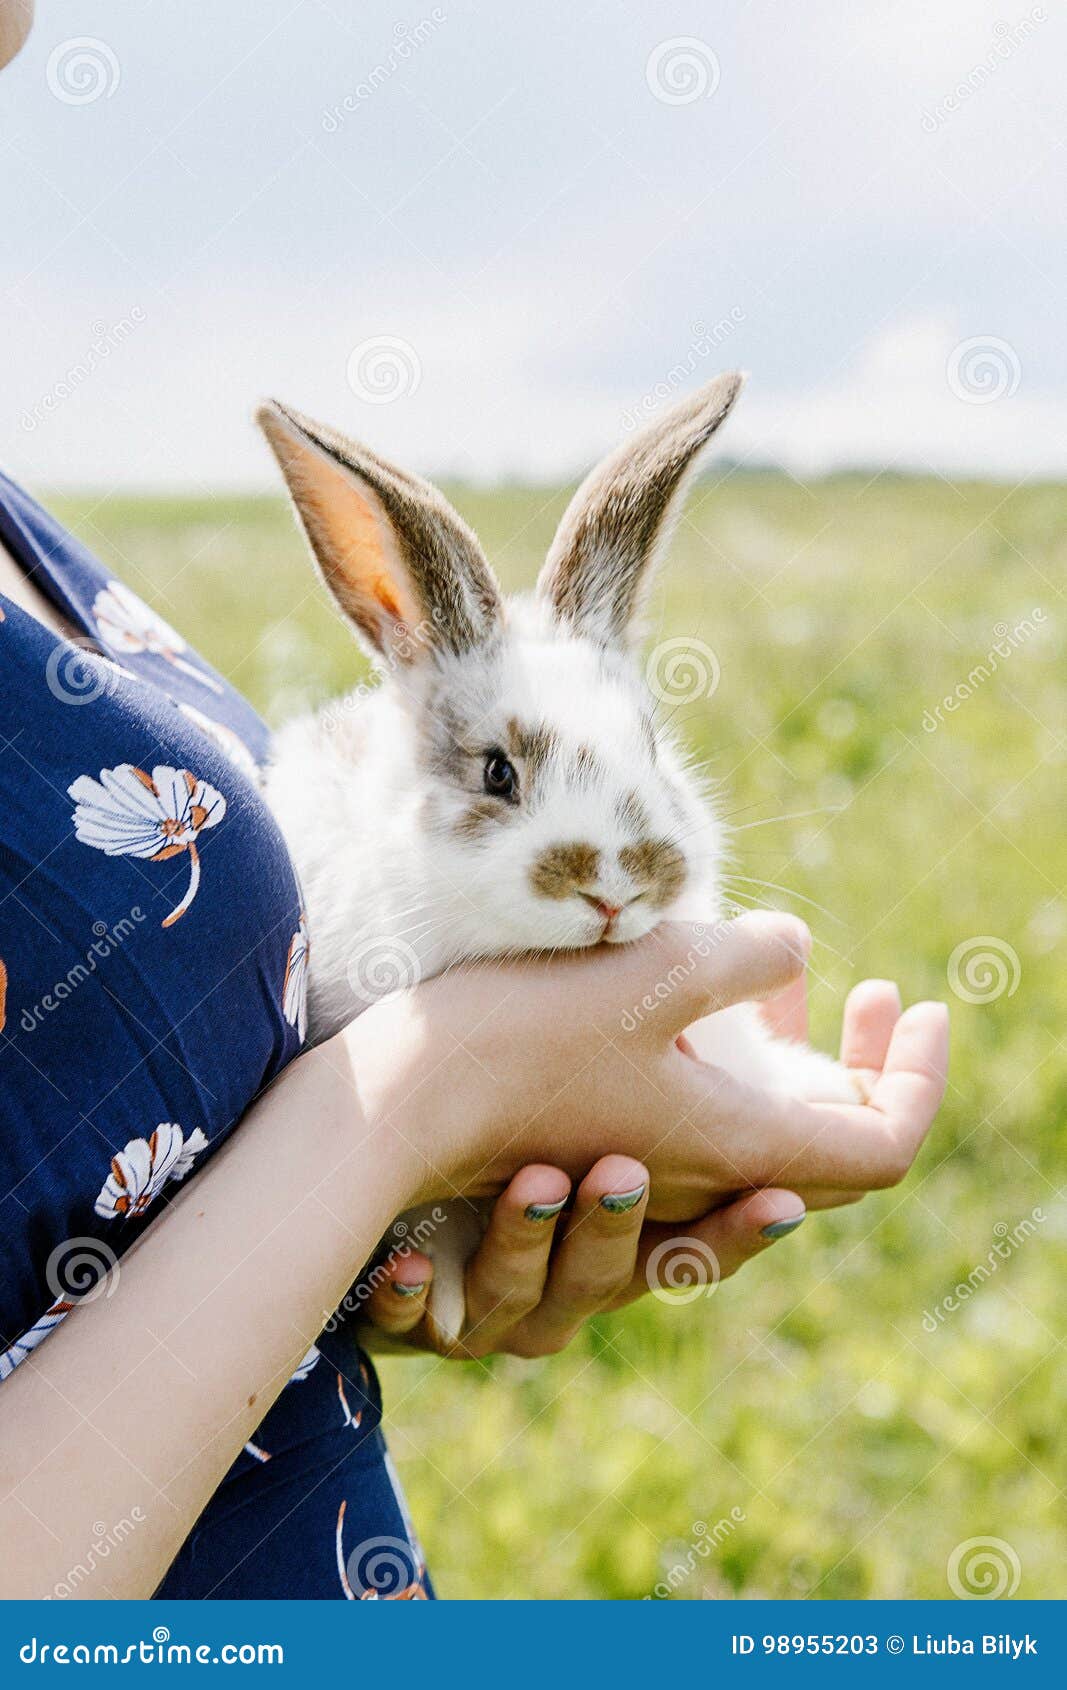 little rabbit, black and white suit, a bunny eating a green gras